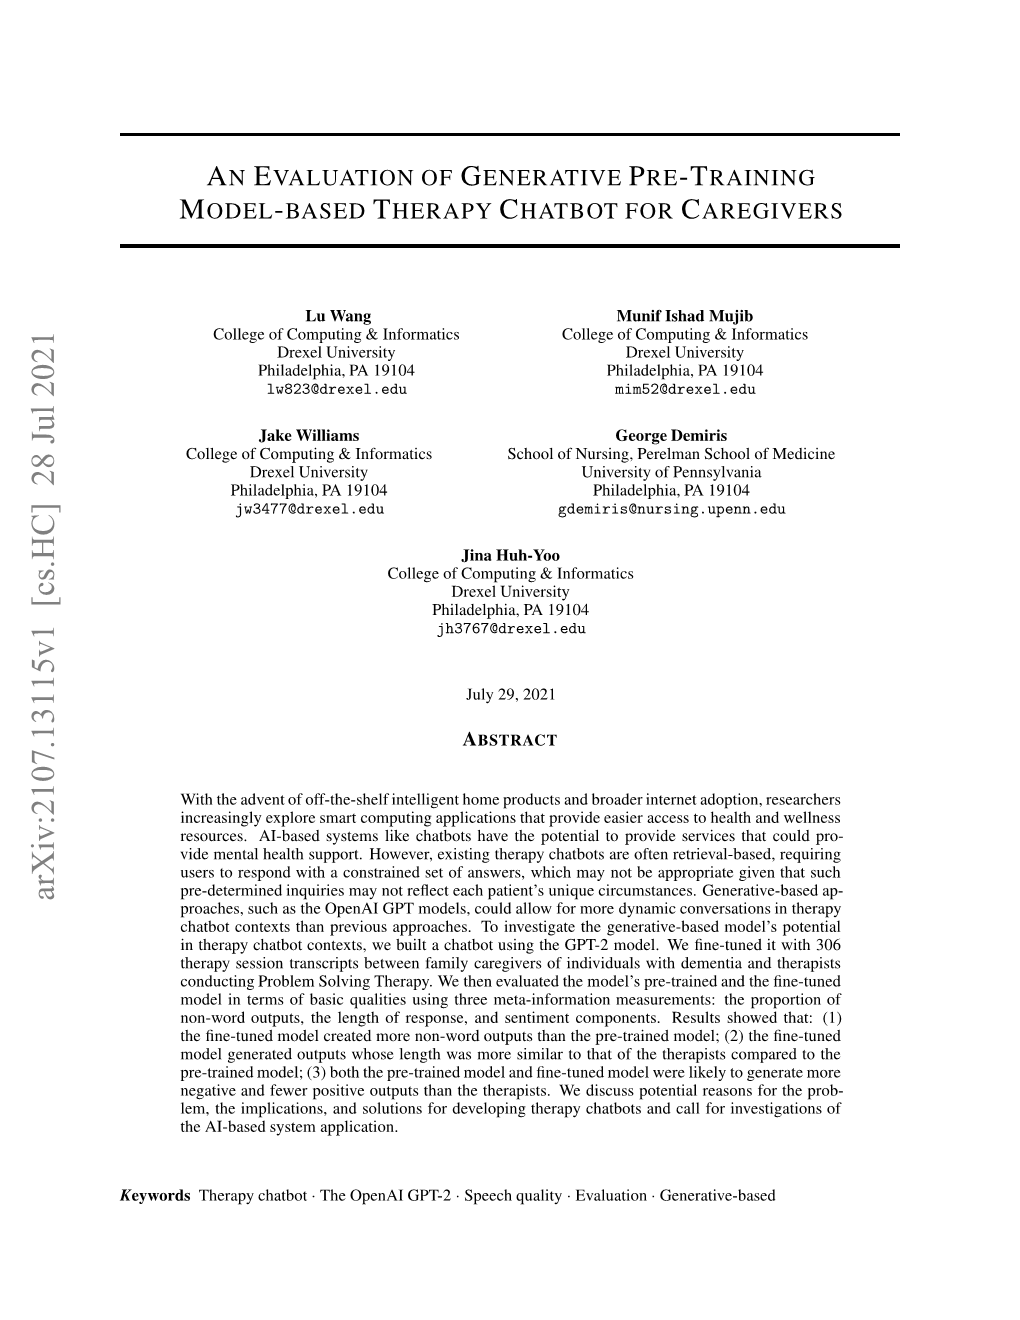 An Evaluation of Generative Pre-Training Model-Based Therapy